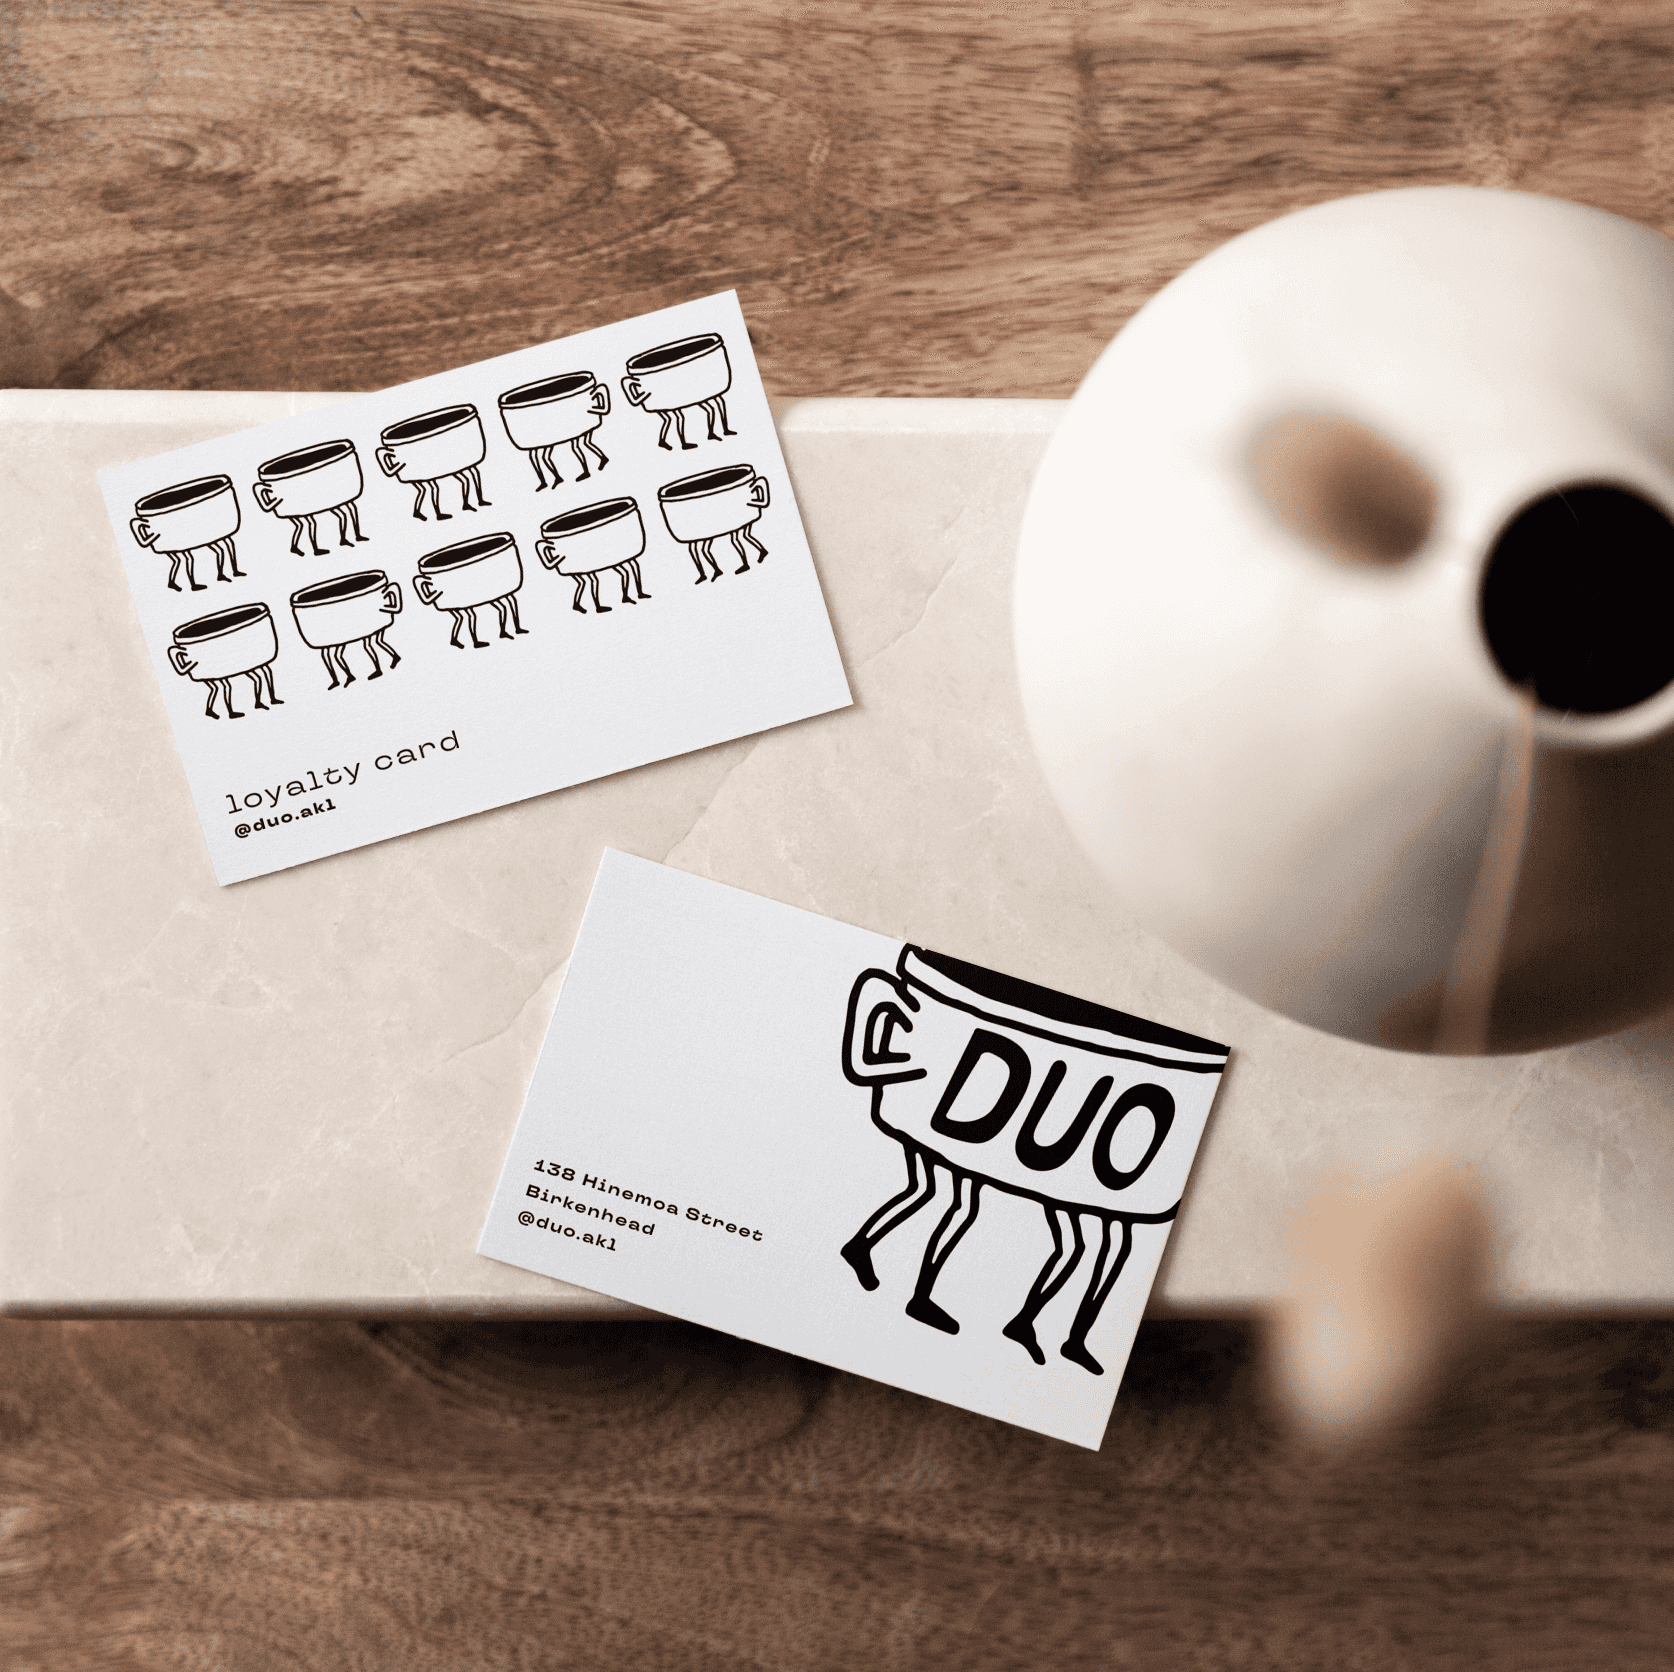 Duo coffee cards next to a cute vase